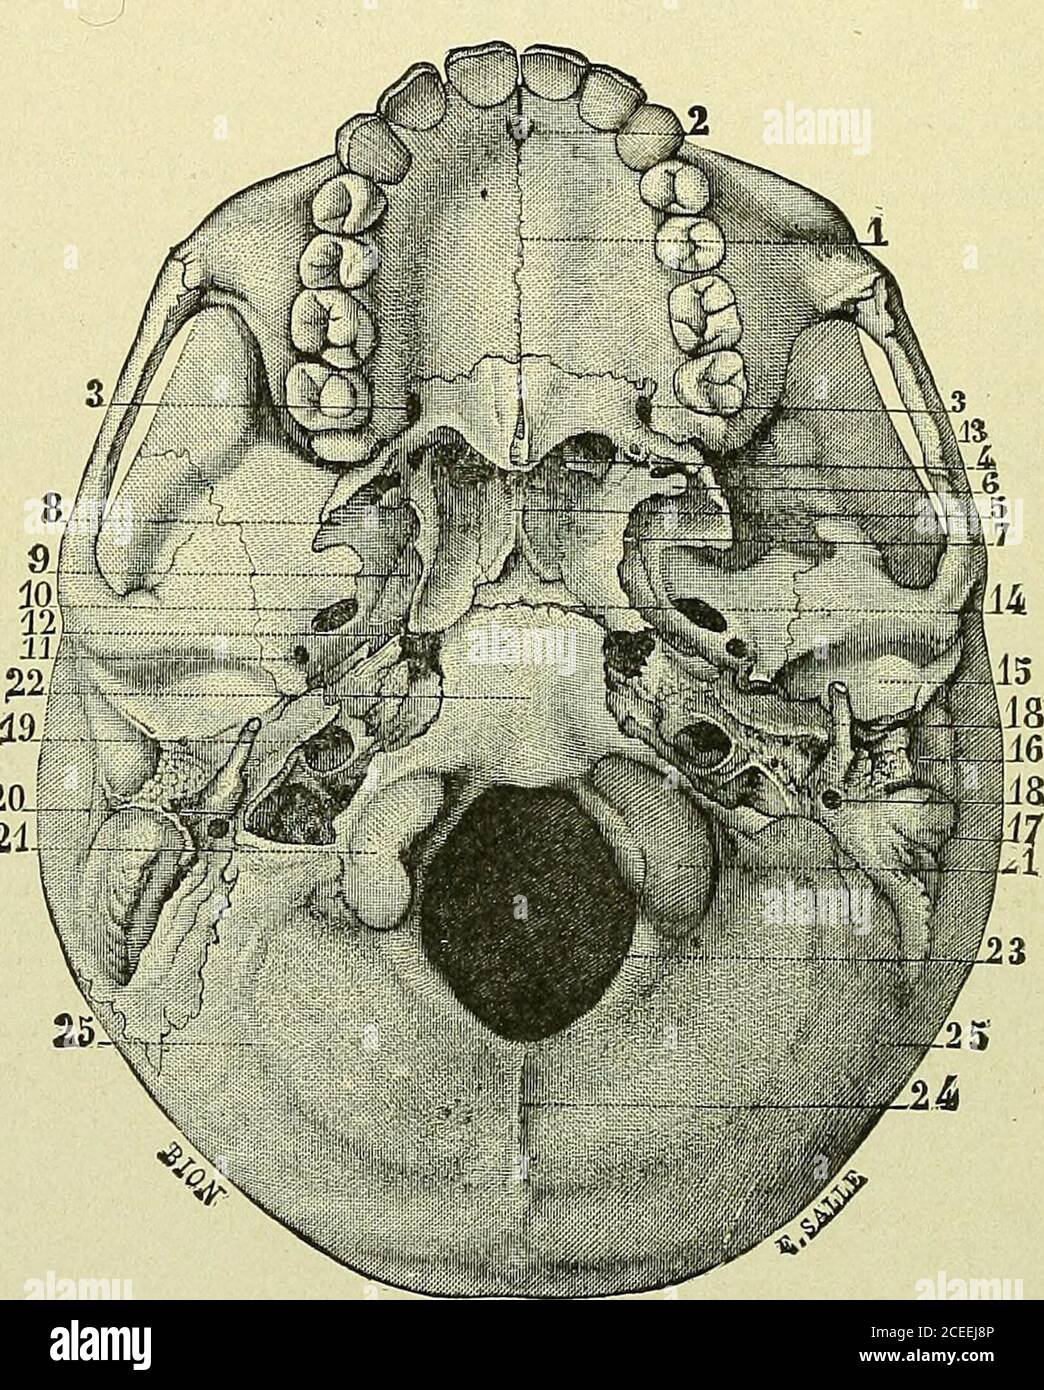 . Text-book of anatomy and physiology for nurses. Fig. 19.—The Vertex and Side of the Skull.—(Gerrish.) Observing the illustrations, or better, with the skull in thehand, the student may trace the frontal, two parietal, and occipitalbones forming the vault of the skull, or the vertex; and at the sidesthe squamous and mastoid portions of the temporal bones and thetip of the great wing of the sphenoid. 26 ANATOMY AND PHYSIOLOGY FOR NURSES. Turning the skull upside down, observe the base. In themedian line at the back is the basal part of the occipital bone,with the foramen magnum and the condyle Stock Photo